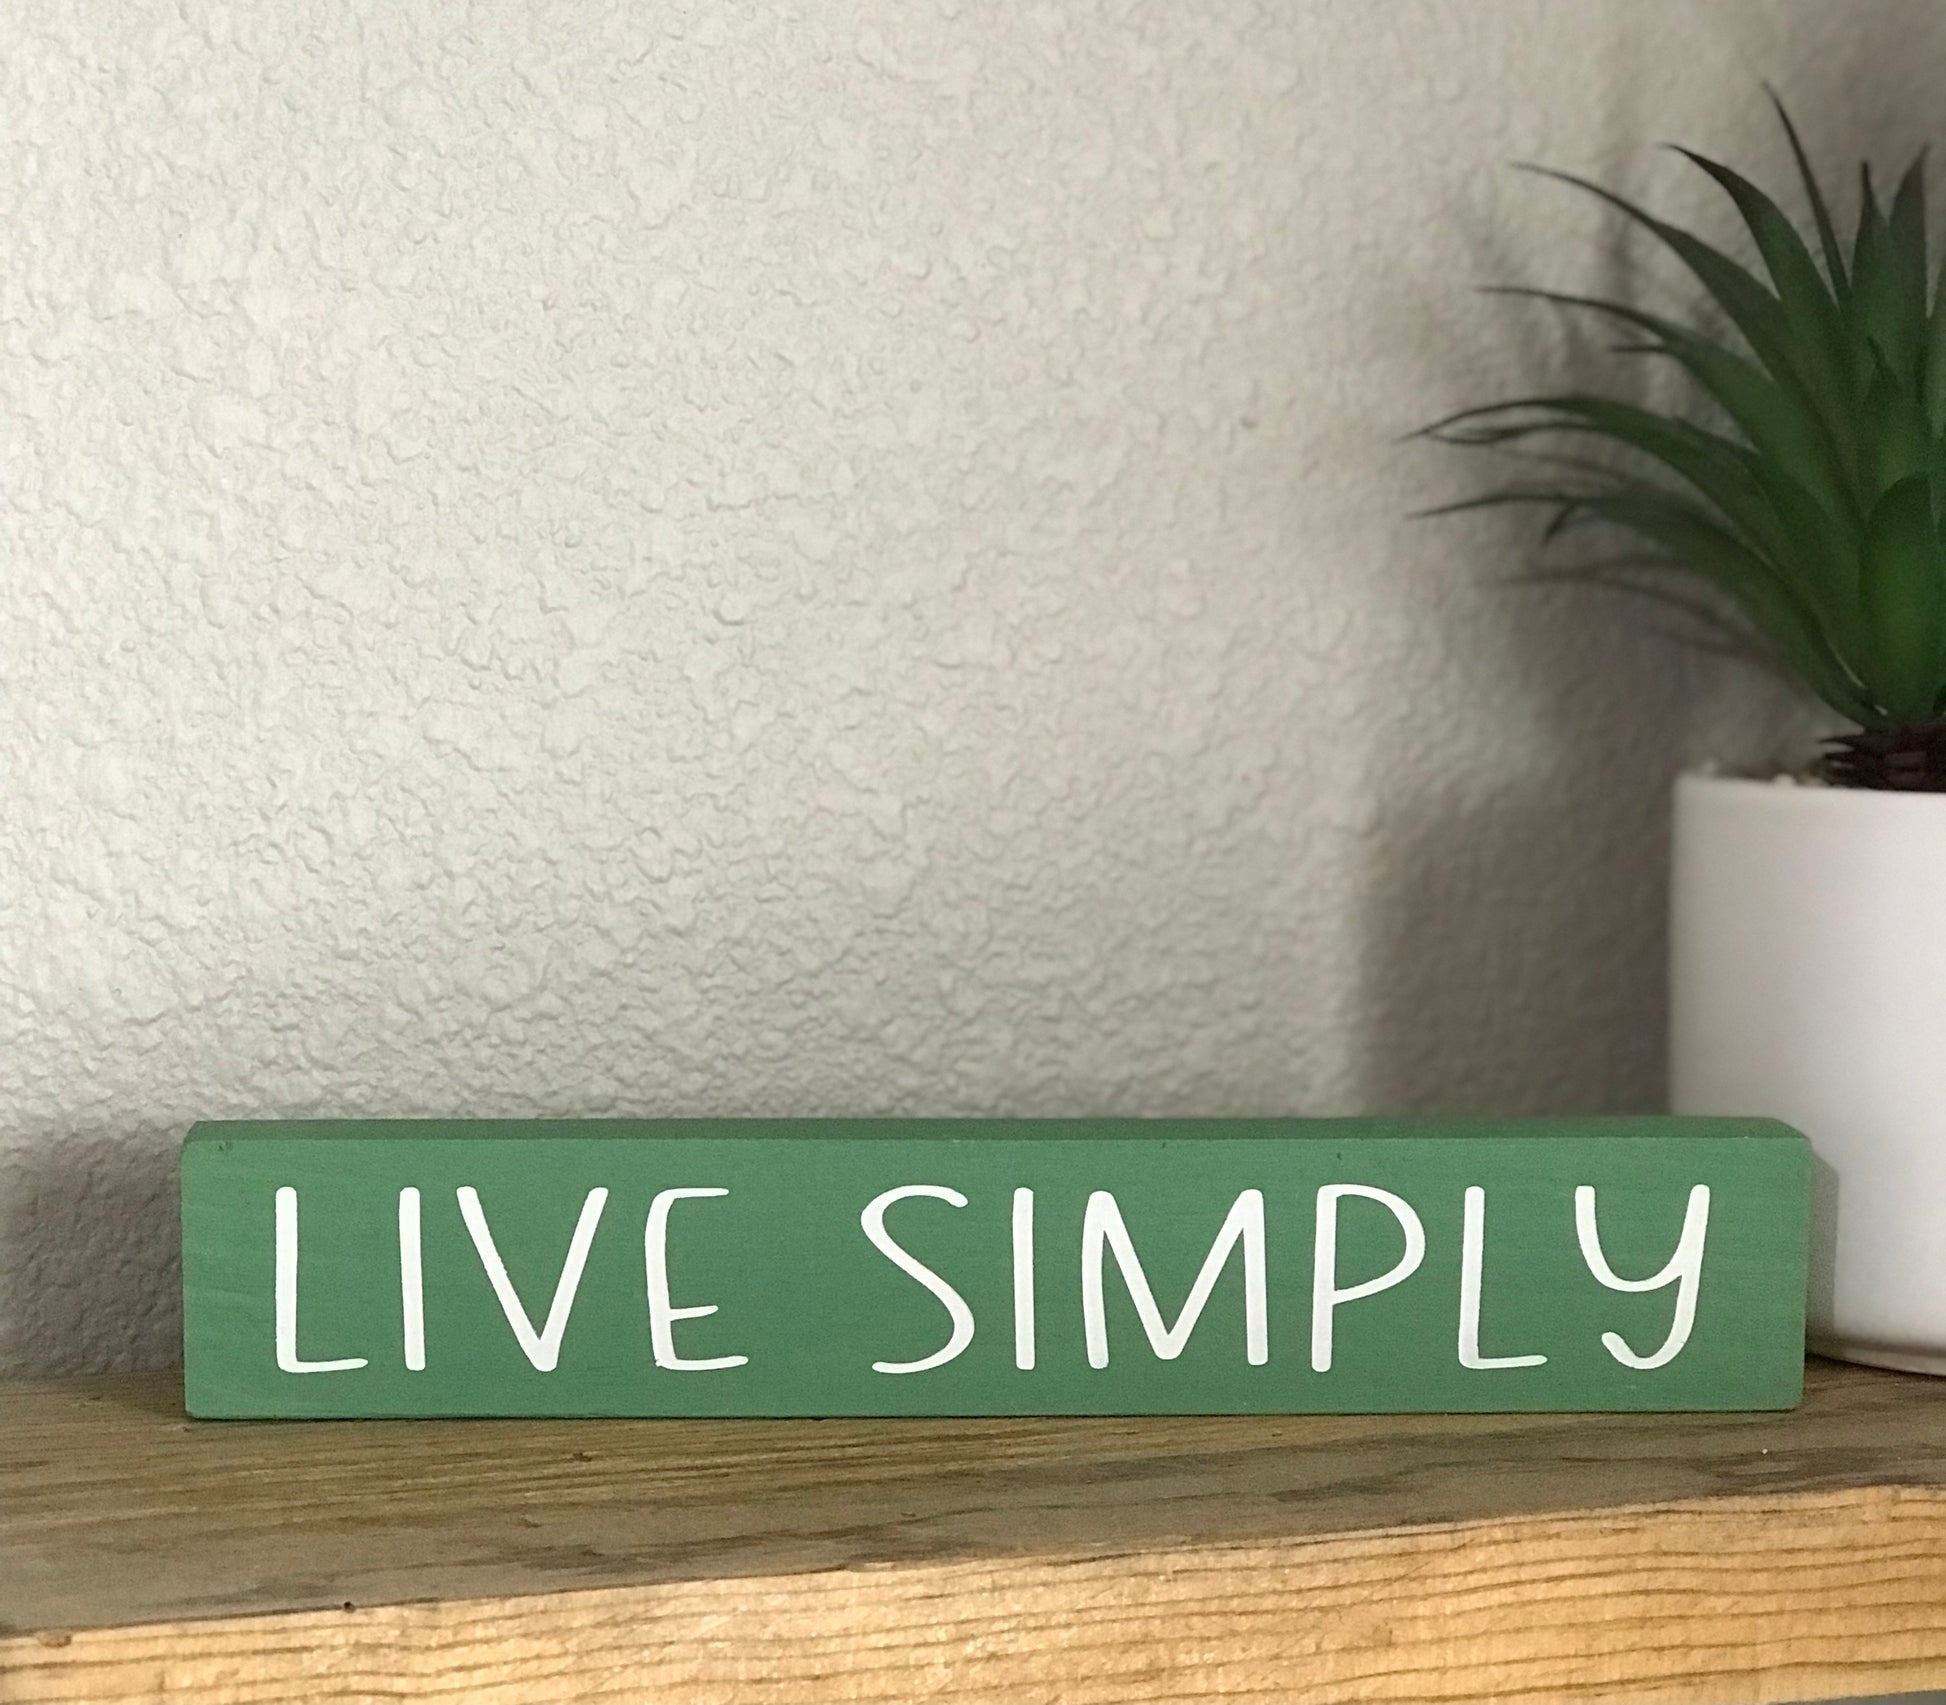 This cute, yet simple wood stick sign is 8 inch x 1 inch and is a perfect accent to your home decor. This sign is painted in a green color with the saying live simply in white.